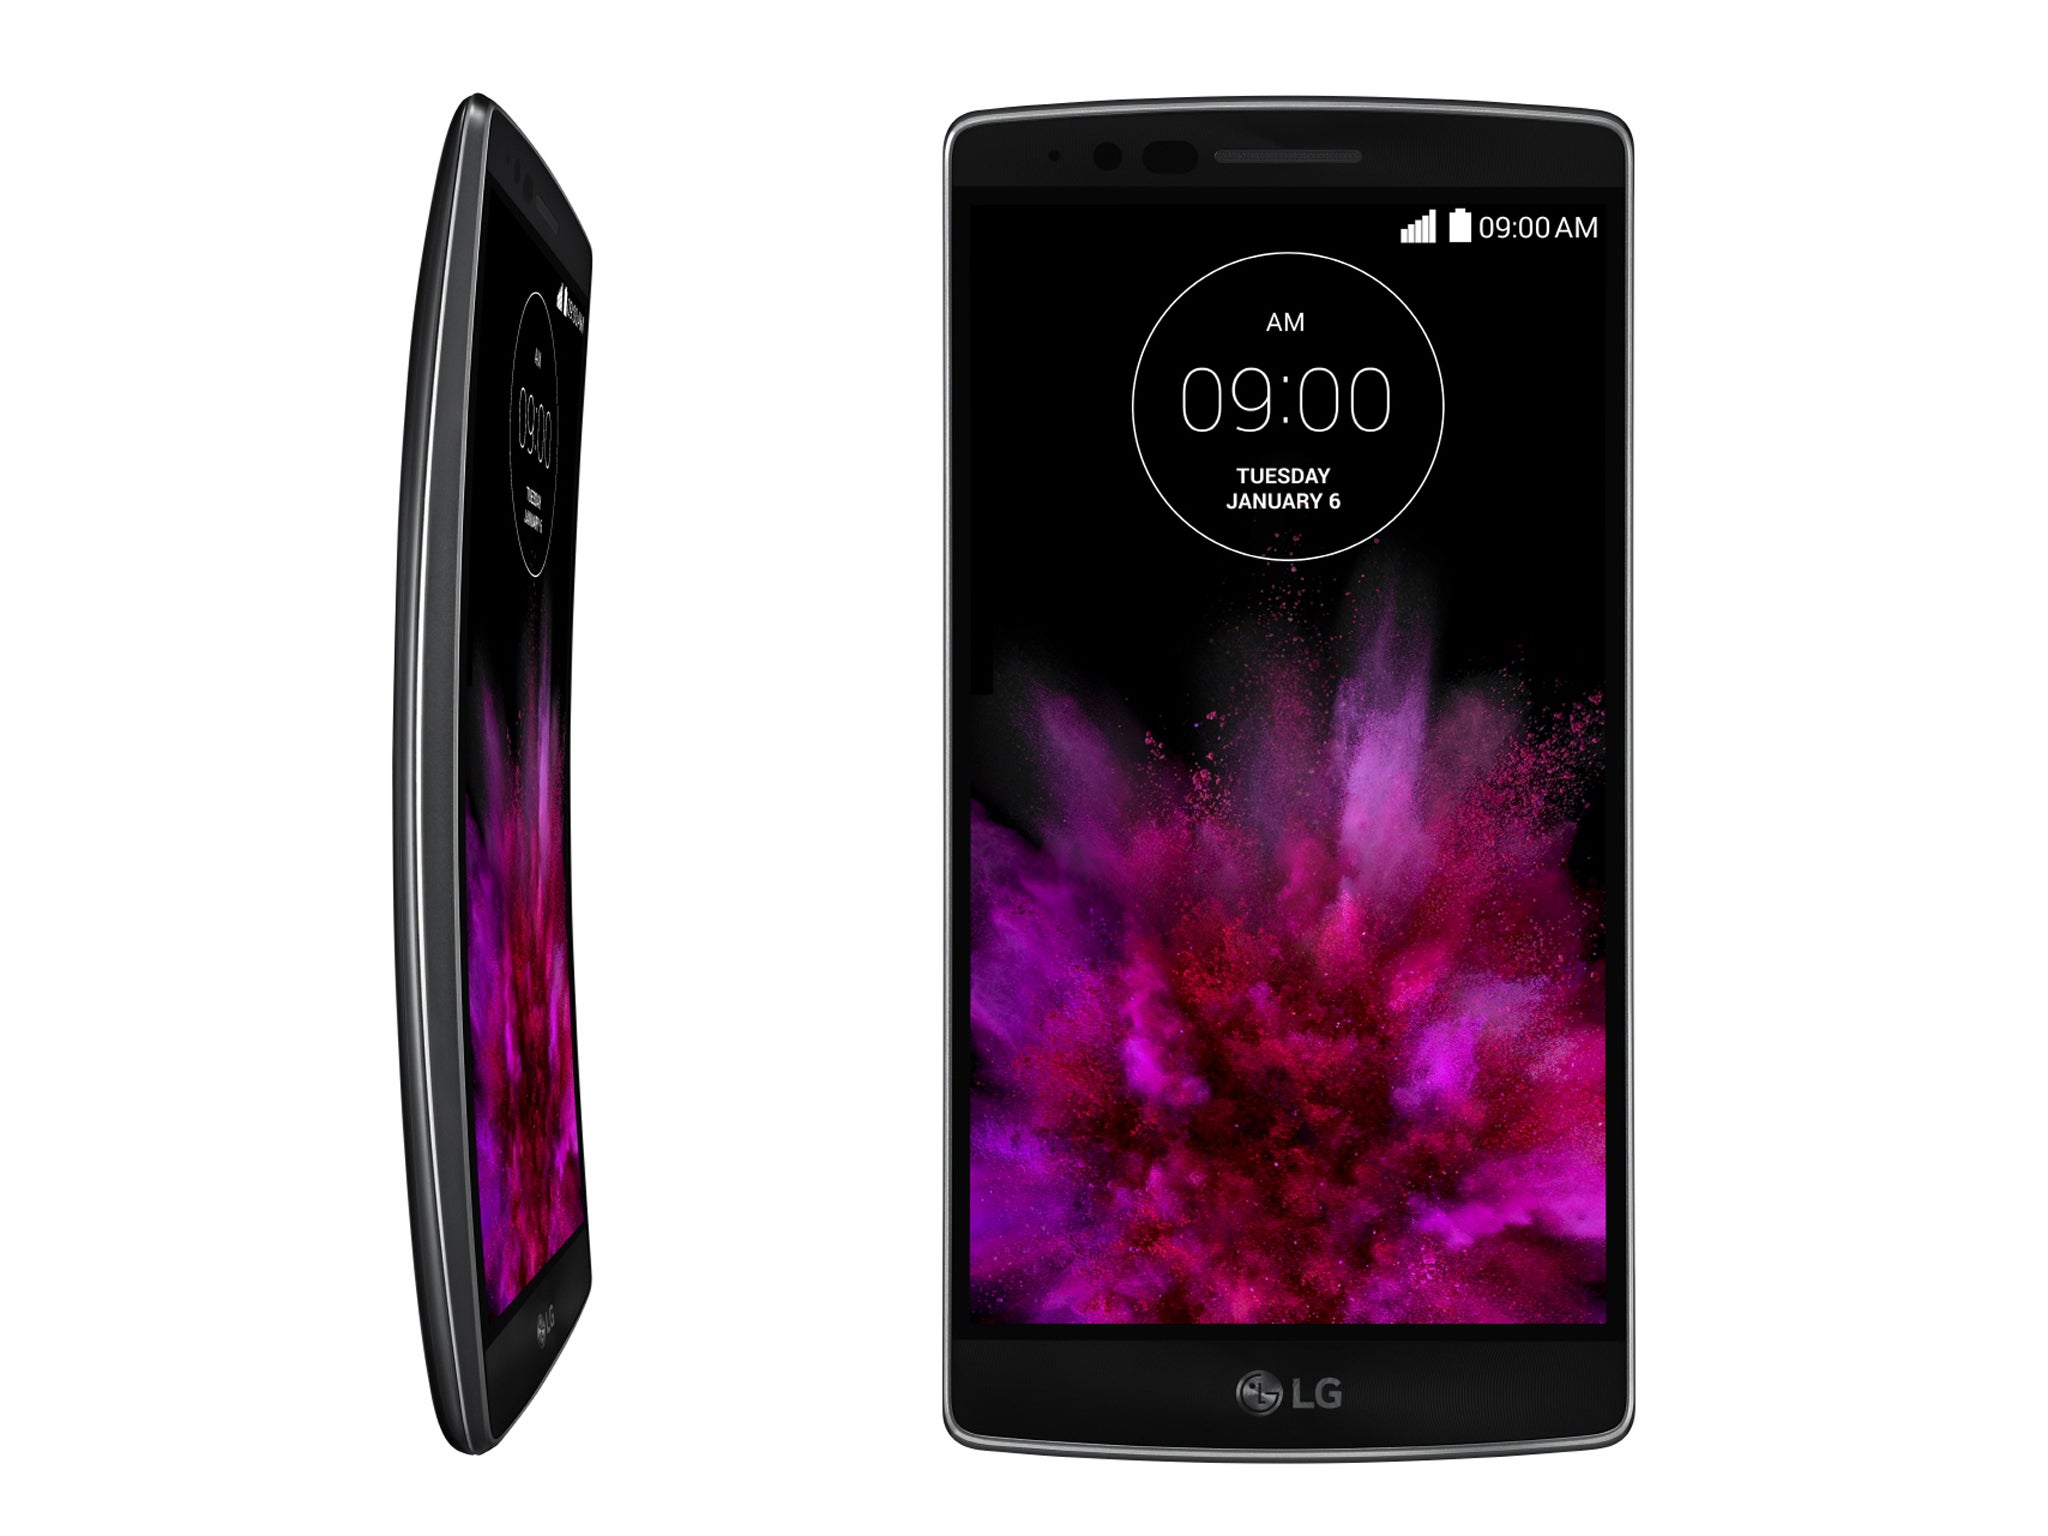 The G Flex 2's curved screen is ergonomic as well as eye-catching, the company says